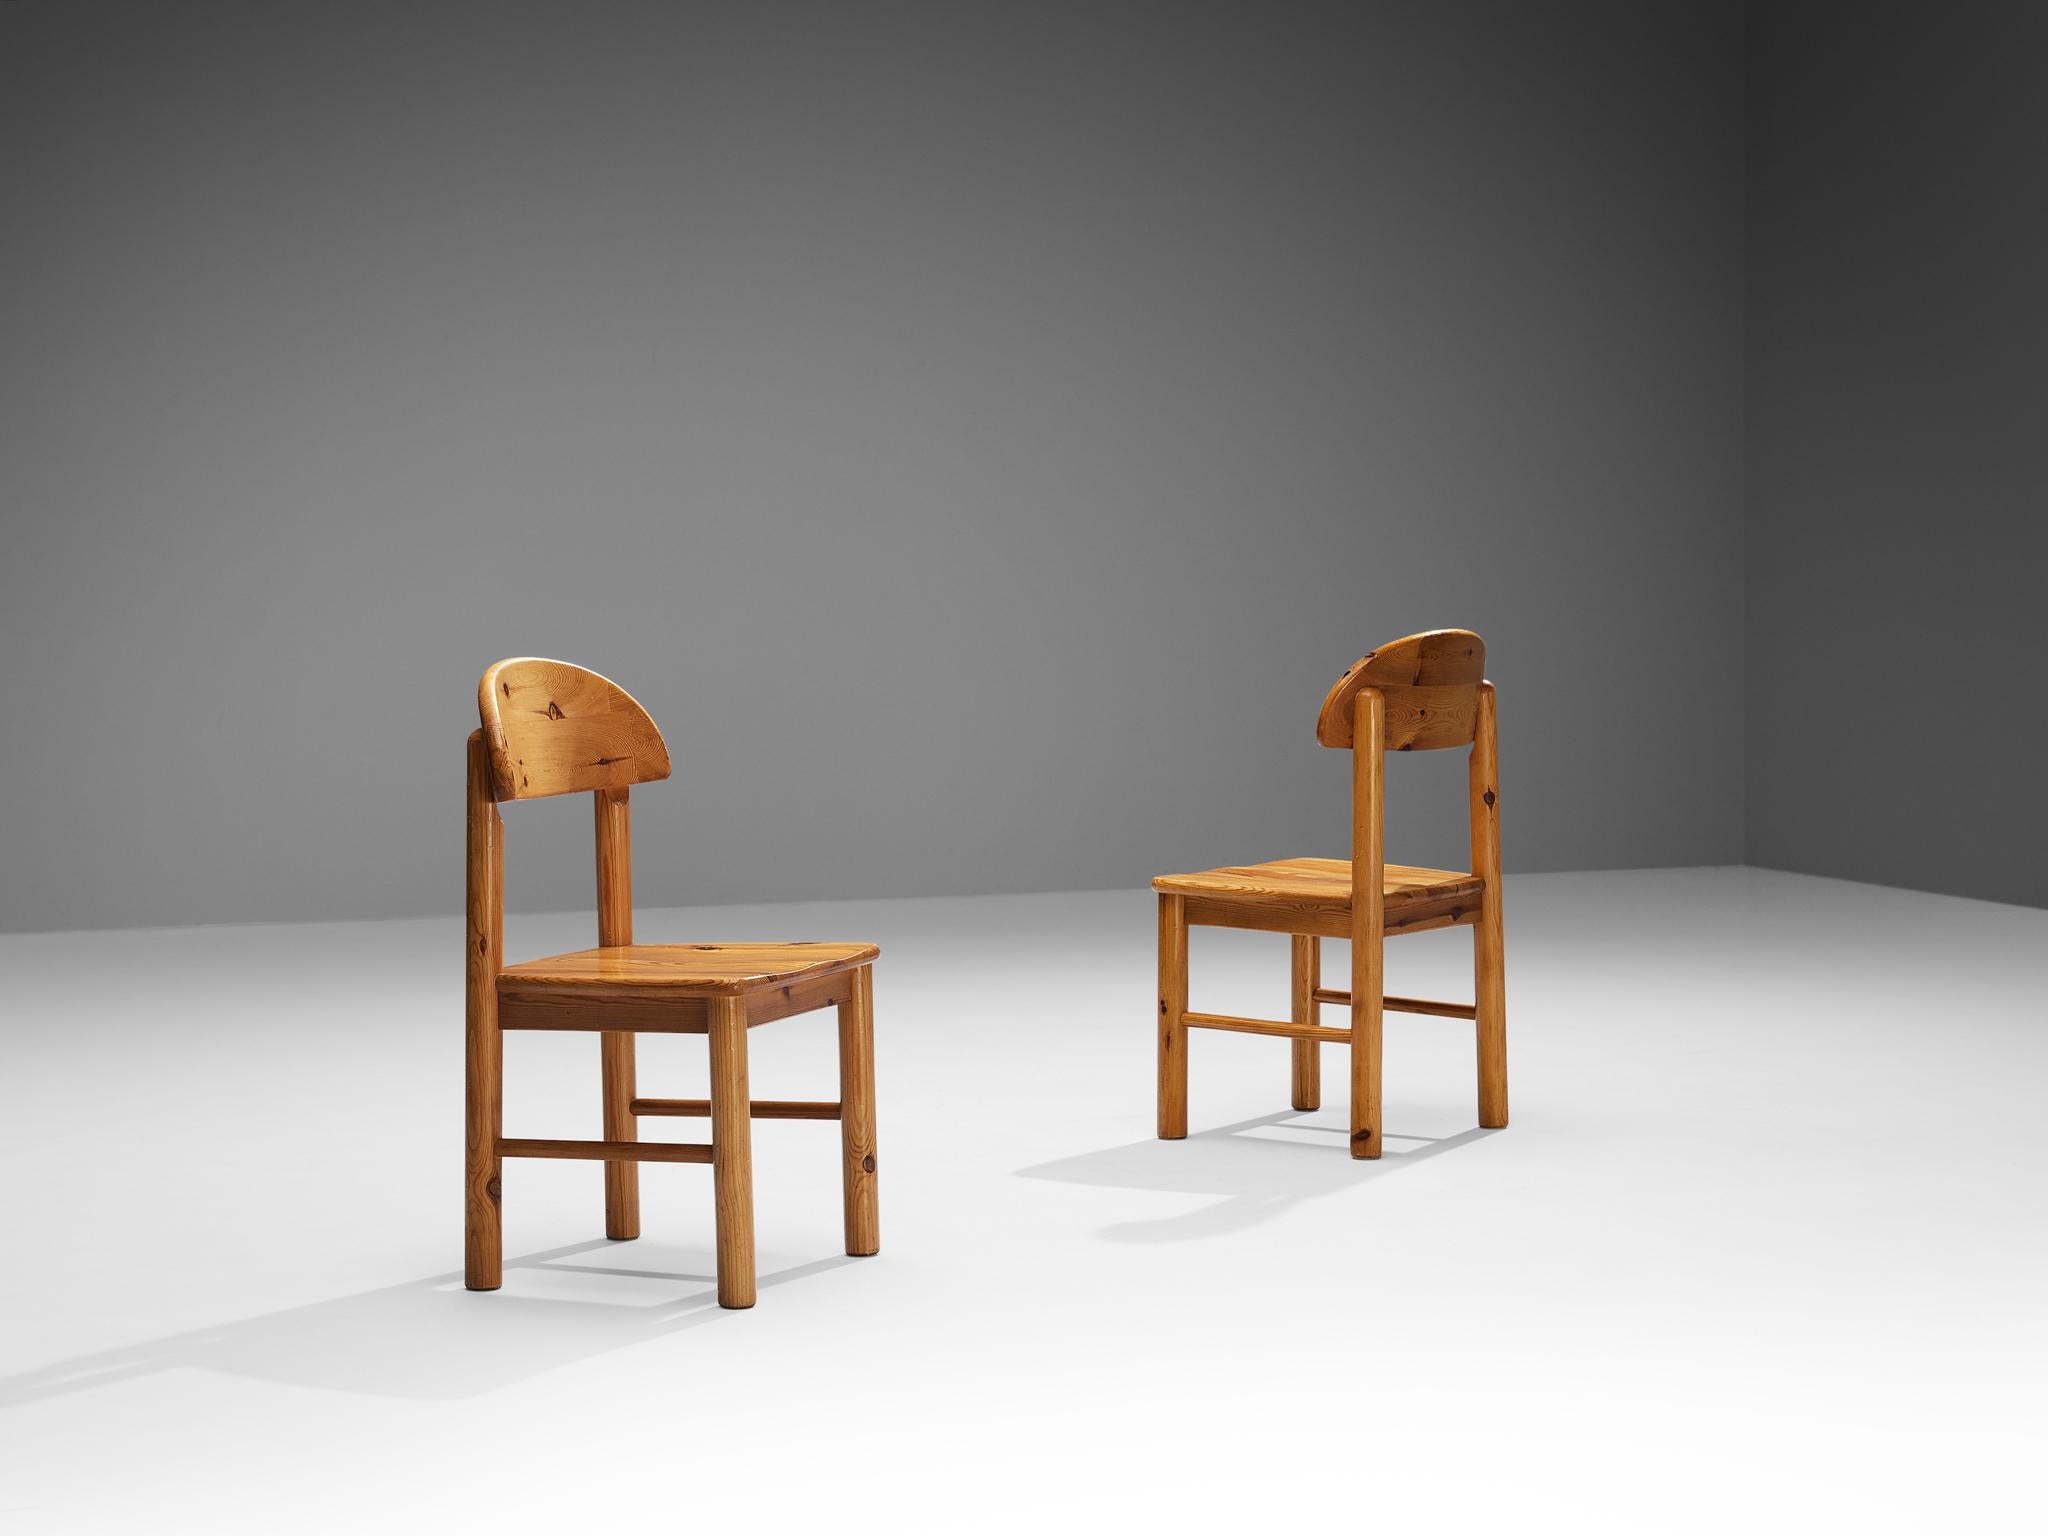 Rainer Daumiller for Hirtshals Sawmill, pair of dining chairs, pine, Denmark, 1970s

Beautiful, organic and natural dining chairs in solid pine designed by Rainer Daumiller. A simplistic design with a round seating and attention for the natural